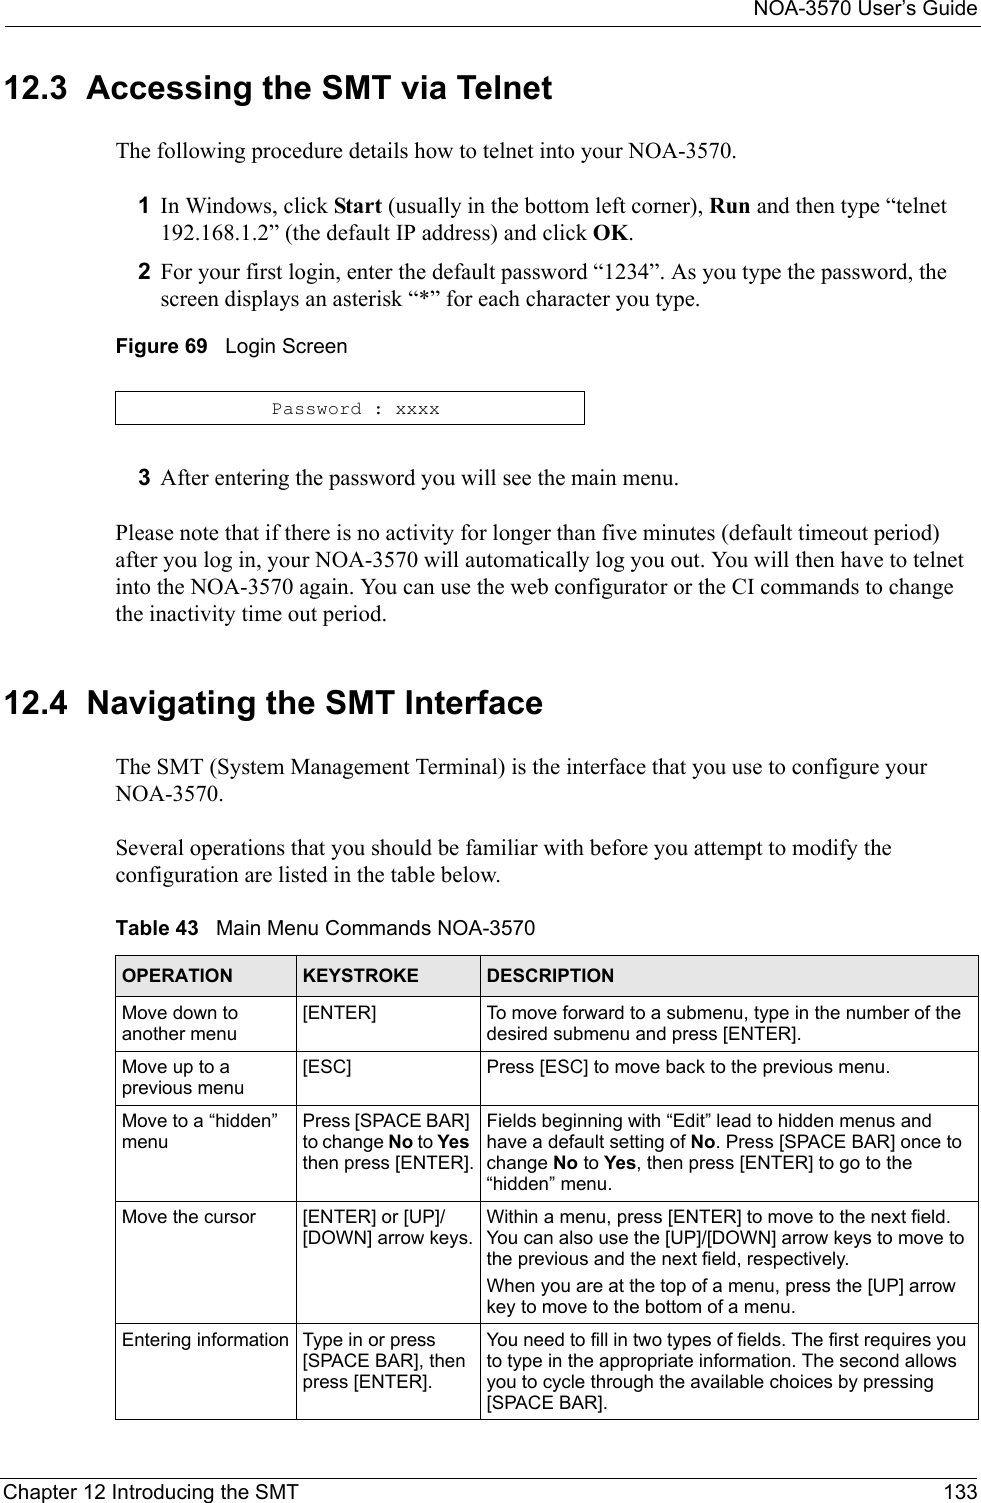 NOA-3570 User’s GuideChapter 12 Introducing the SMT 13312.3  Accessing the SMT via TelnetThe following procedure details how to telnet into your NOA-3570.1In Windows, click Start (usually in the bottom left corner), Run and then type “telnet 192.168.1.2” (the default IP address) and click OK. 2For your first login, enter the default password “1234”. As you type the password, the screen displays an asterisk “*” for each character you type.Figure 69   Login Screen3After entering the password you will see the main menu.Please note that if there is no activity for longer than five minutes (default timeout period) after you log in, your NOA-3570 will automatically log you out. You will then have to telnet into the NOA-3570 again. You can use the web configurator or the CI commands to change the inactivity time out period. 12.4  Navigating the SMT InterfaceThe SMT (System Management Terminal) is the interface that you use to configure your NOA-3570. Several operations that you should be familiar with before you attempt to modify the configuration are listed in the table below.Password : xxxxTable 43   Main Menu Commands NOA-3570OPERATION KEYSTROKE DESCRIPTIONMove down to another menu[ENTER] To move forward to a submenu, type in the number of the desired submenu and press [ENTER].Move up to a previous menu[ESC] Press [ESC] to move back to the previous menu.Move to a “hidden” menuPress [SPACE BAR] to change No to Yes then press [ENTER].Fields beginning with “Edit” lead to hidden menus and have a default setting of No. Press [SPACE BAR] once to change No to Yes, then press [ENTER] to go to the  “hidden” menu.Move the cursor [ENTER] or [UP]/[DOWN] arrow keys.Within a menu, press [ENTER] to move to the next field. You can also use the [UP]/[DOWN] arrow keys to move to the previous and the next field, respectively.When you are at the top of a menu, press the [UP] arrow key to move to the bottom of a menu.Entering information Type in or press [SPACE BAR], then press [ENTER].You need to fill in two types of fields. The first requires you to type in the appropriate information. The second allows you to cycle through the available choices by pressing [SPACE BAR].